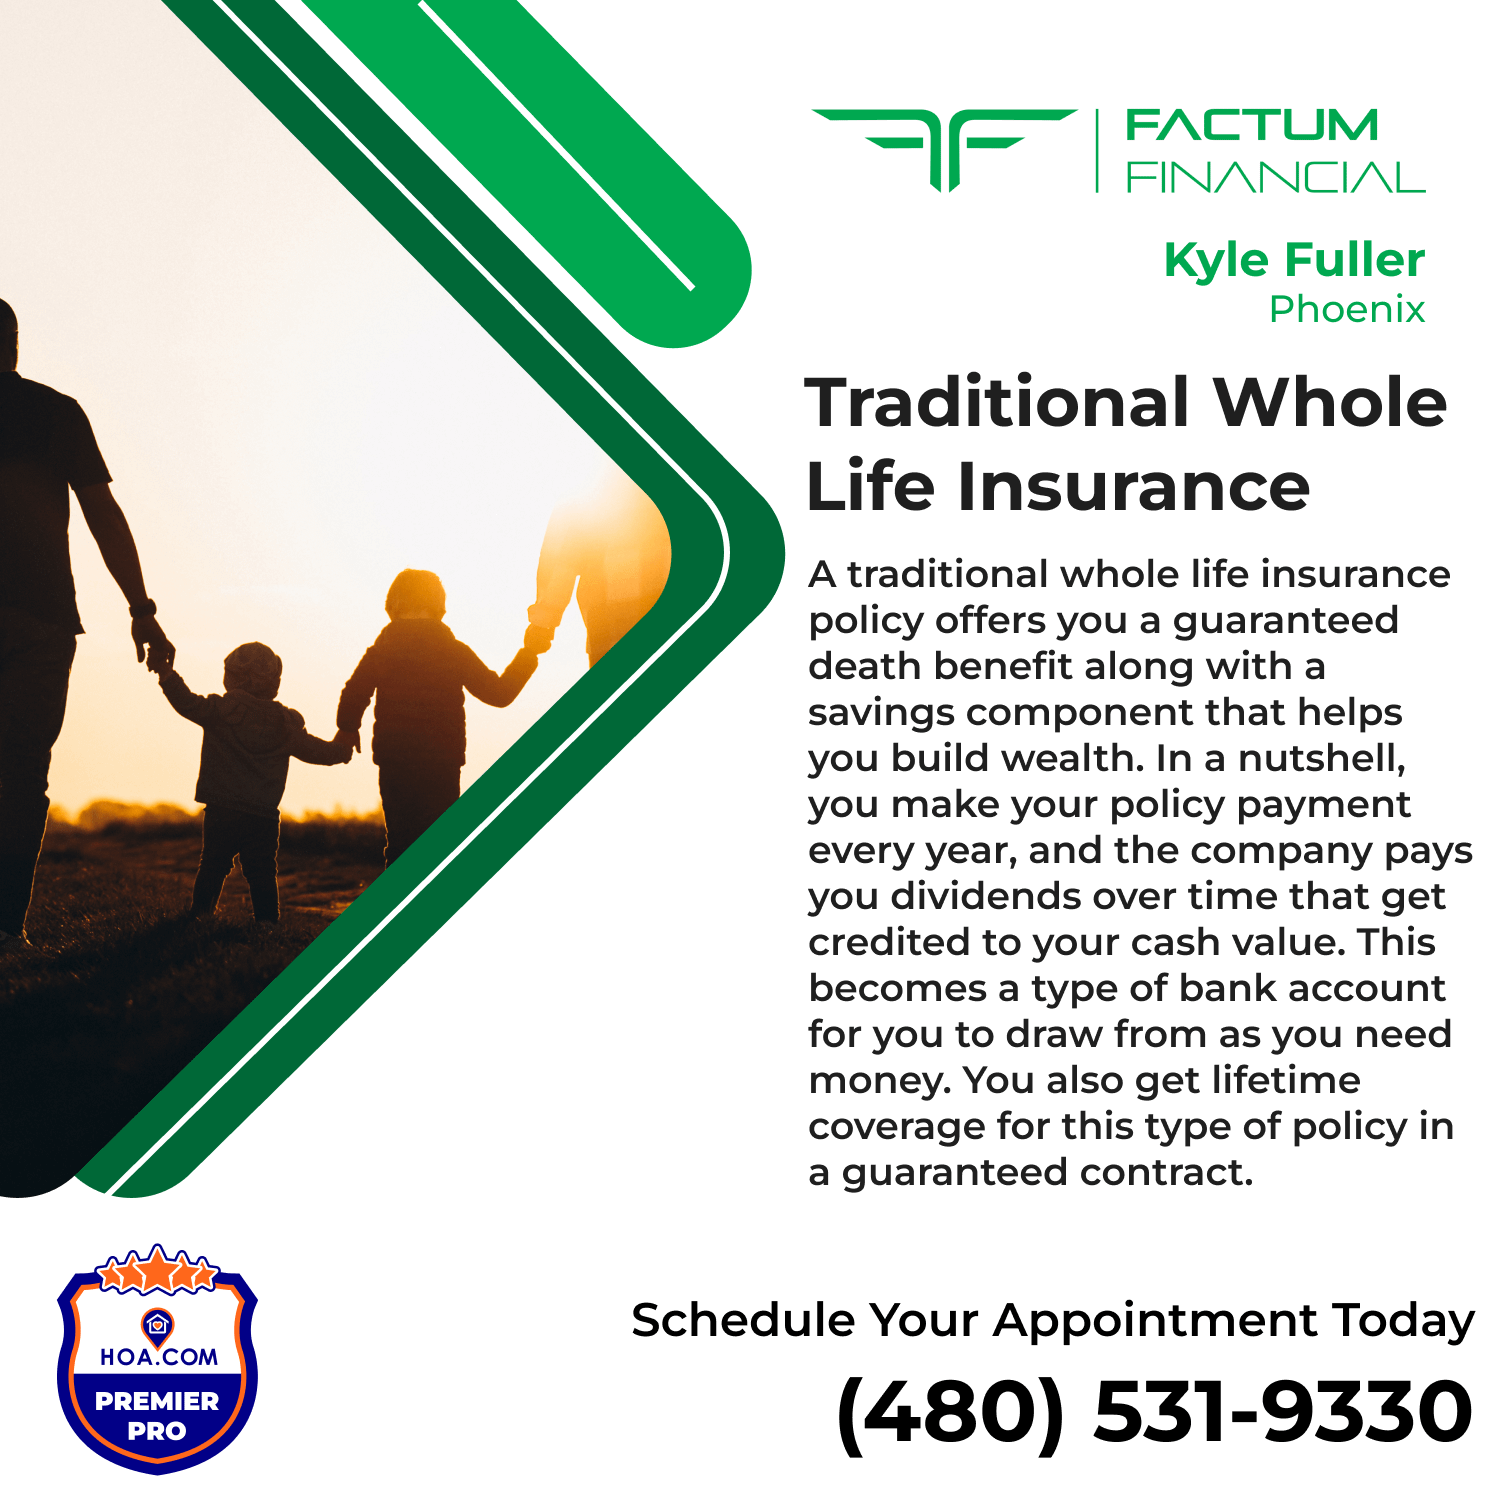 Factum Financial Traditional Whole Life Insurance